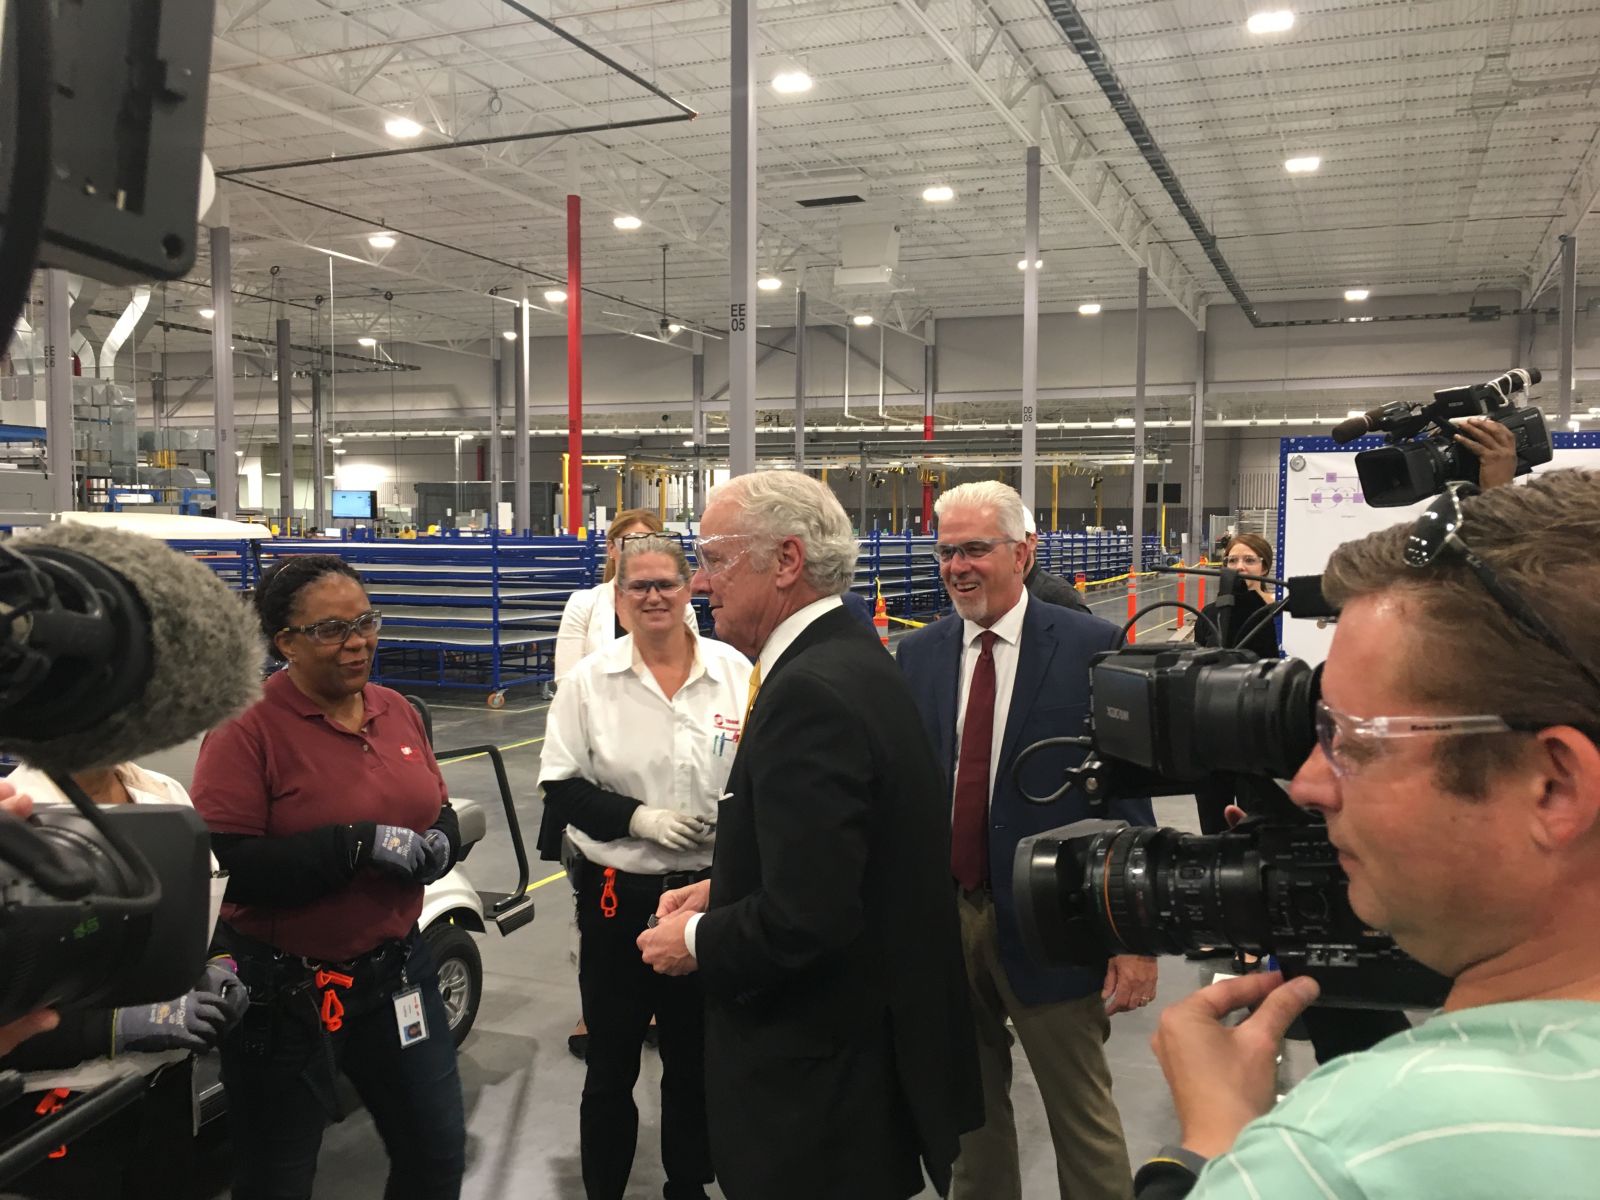 S.C. Gov. Henry McMaster tours the expanded Trane manufacturing plant in Northeast Columbia. (Photo/Renee Sexton)